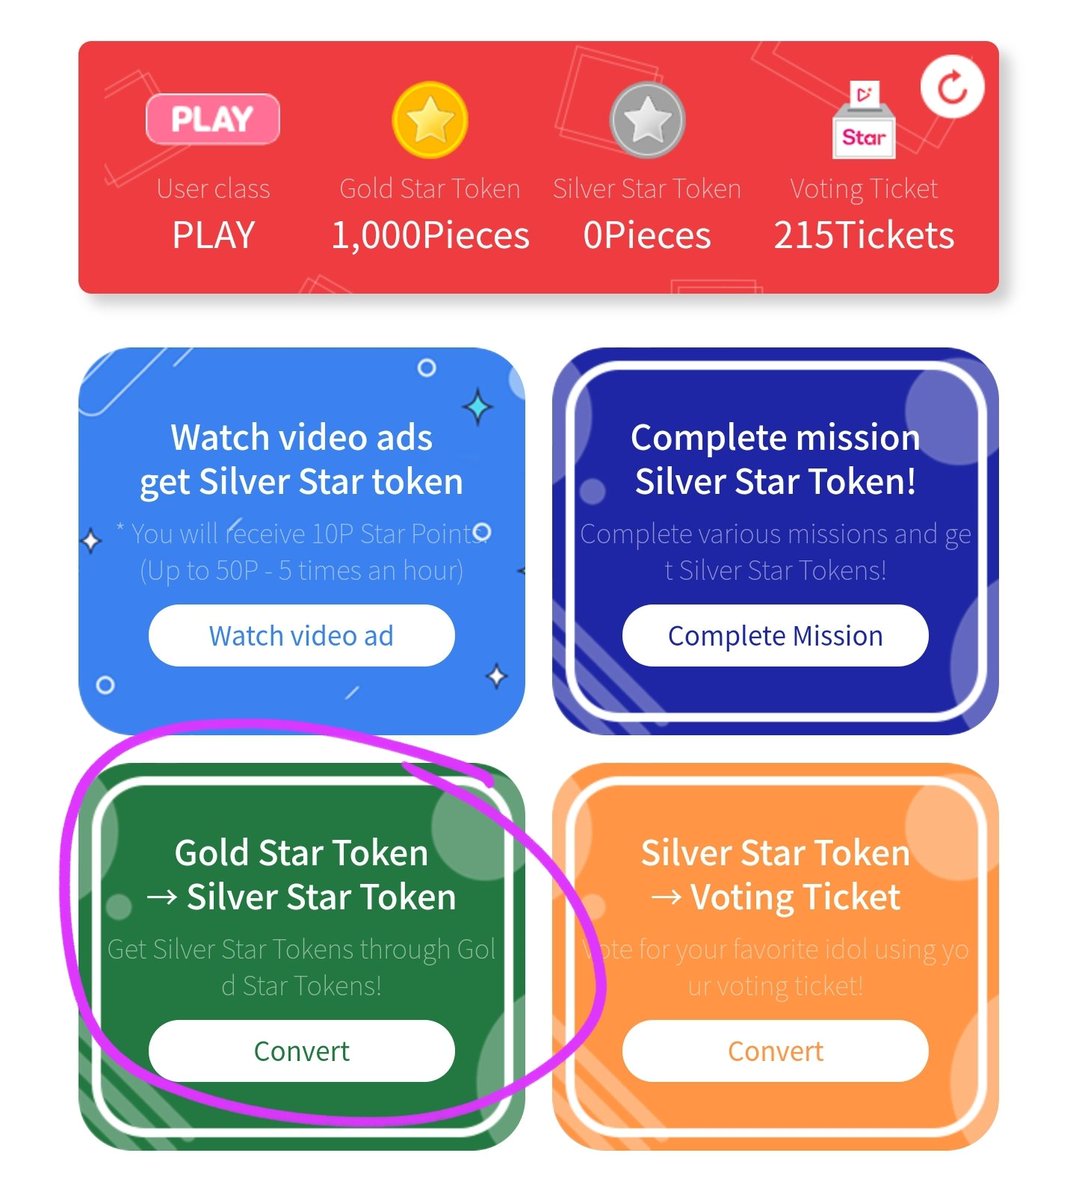 If you are able to purchase, head to the Token Store and choose the one you want to purchase, after purchasing head back to the Free Tokens page and click on the green box on the bottom left and to convert your gold tokens to silver tokens.